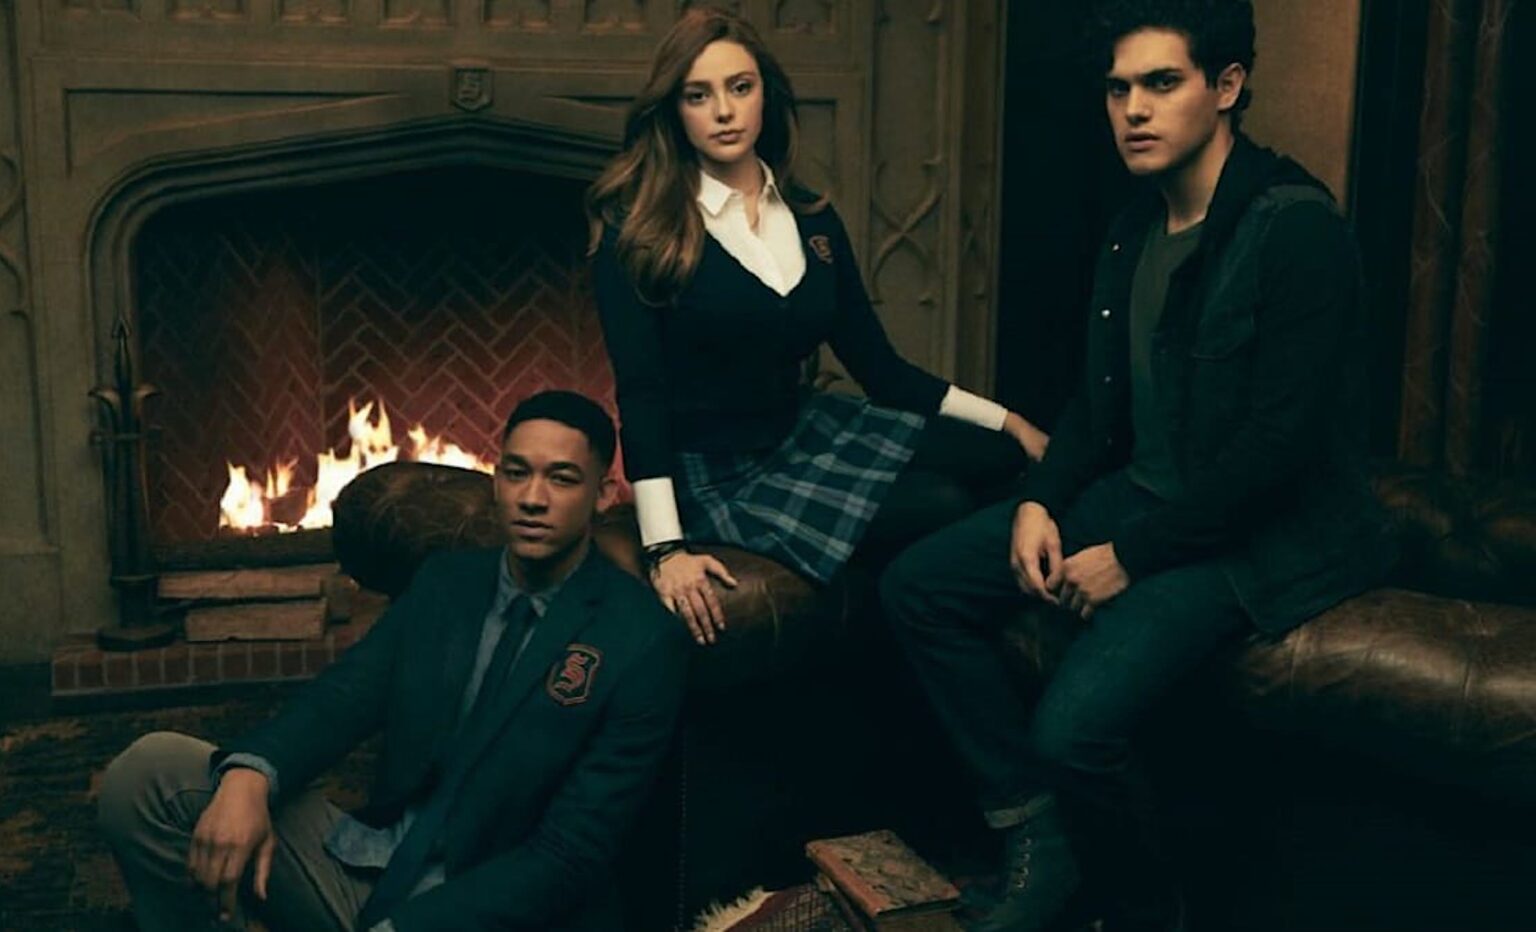 Out of all the TV show spinoffs, 'Legacies' is swiftly climbing the ranks. Based on the 2009 series, 'The Vampire Diaries', this teen drama is impressive!